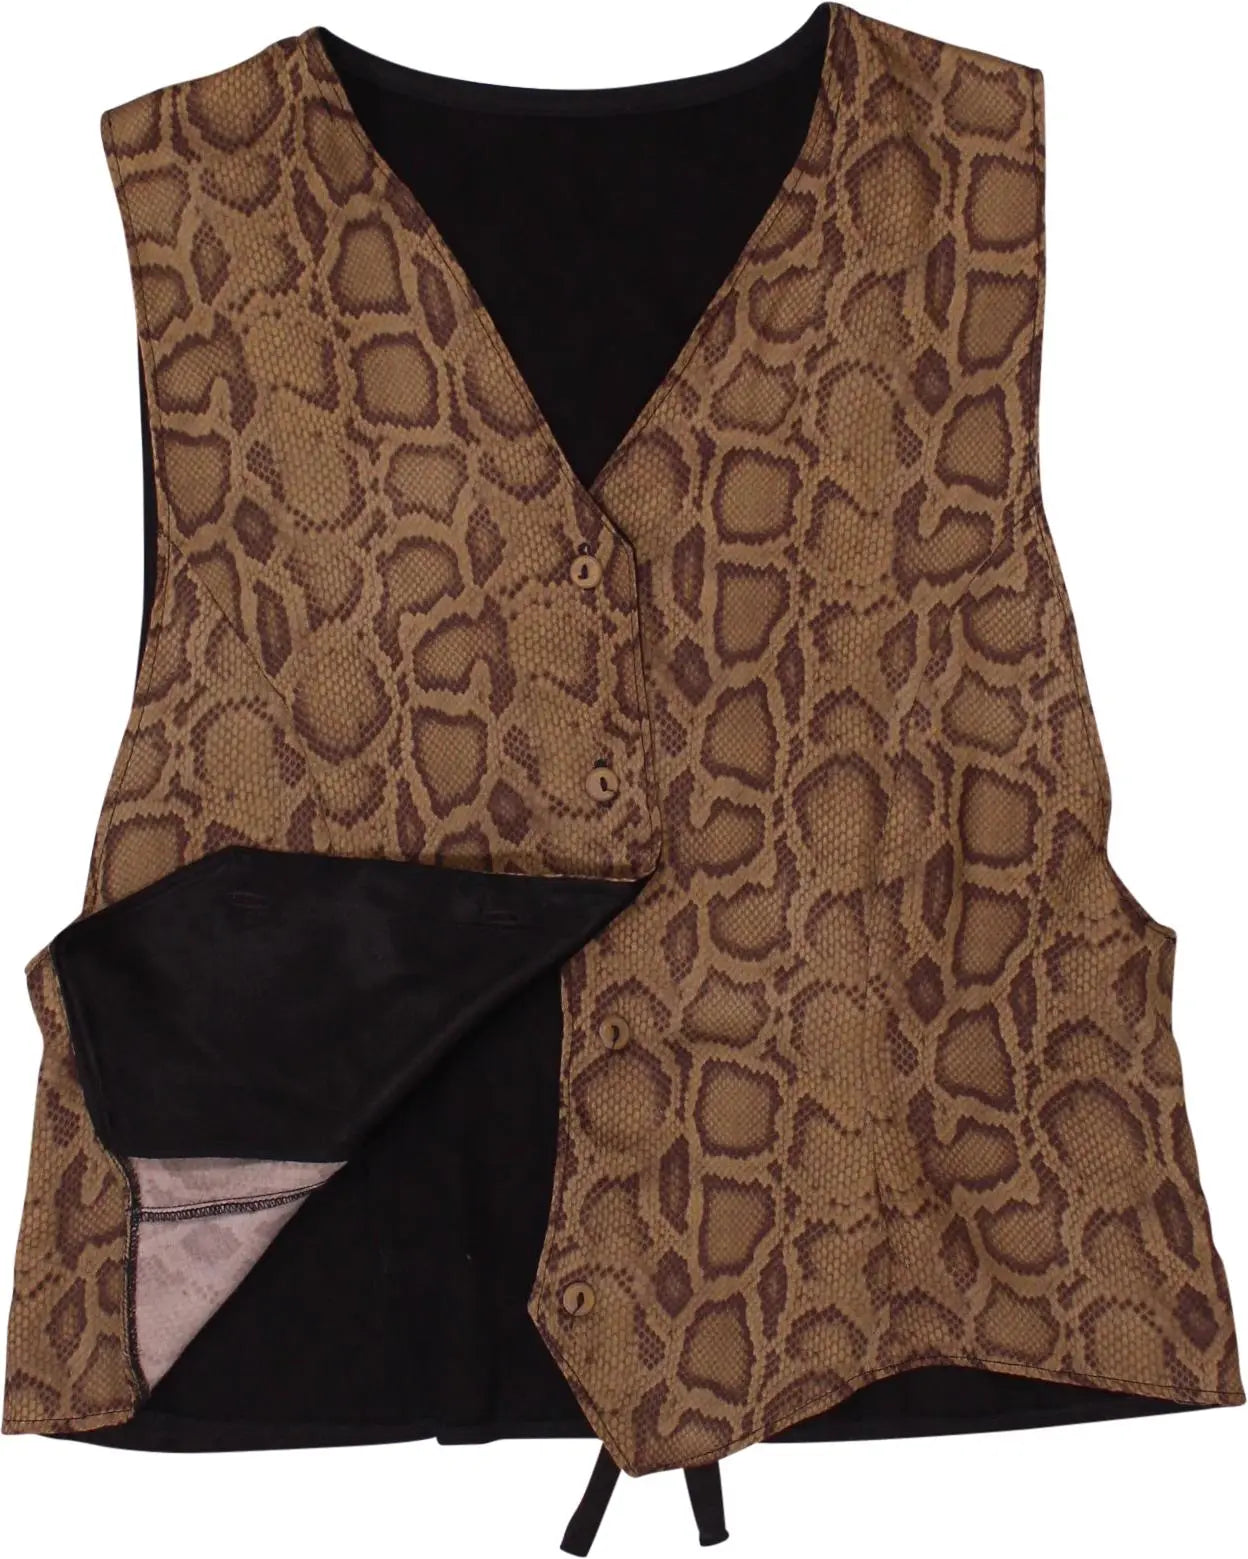 Unknown - Sleeveless Vest with Leopard Print- ThriftTale.com - Vintage and second handclothing